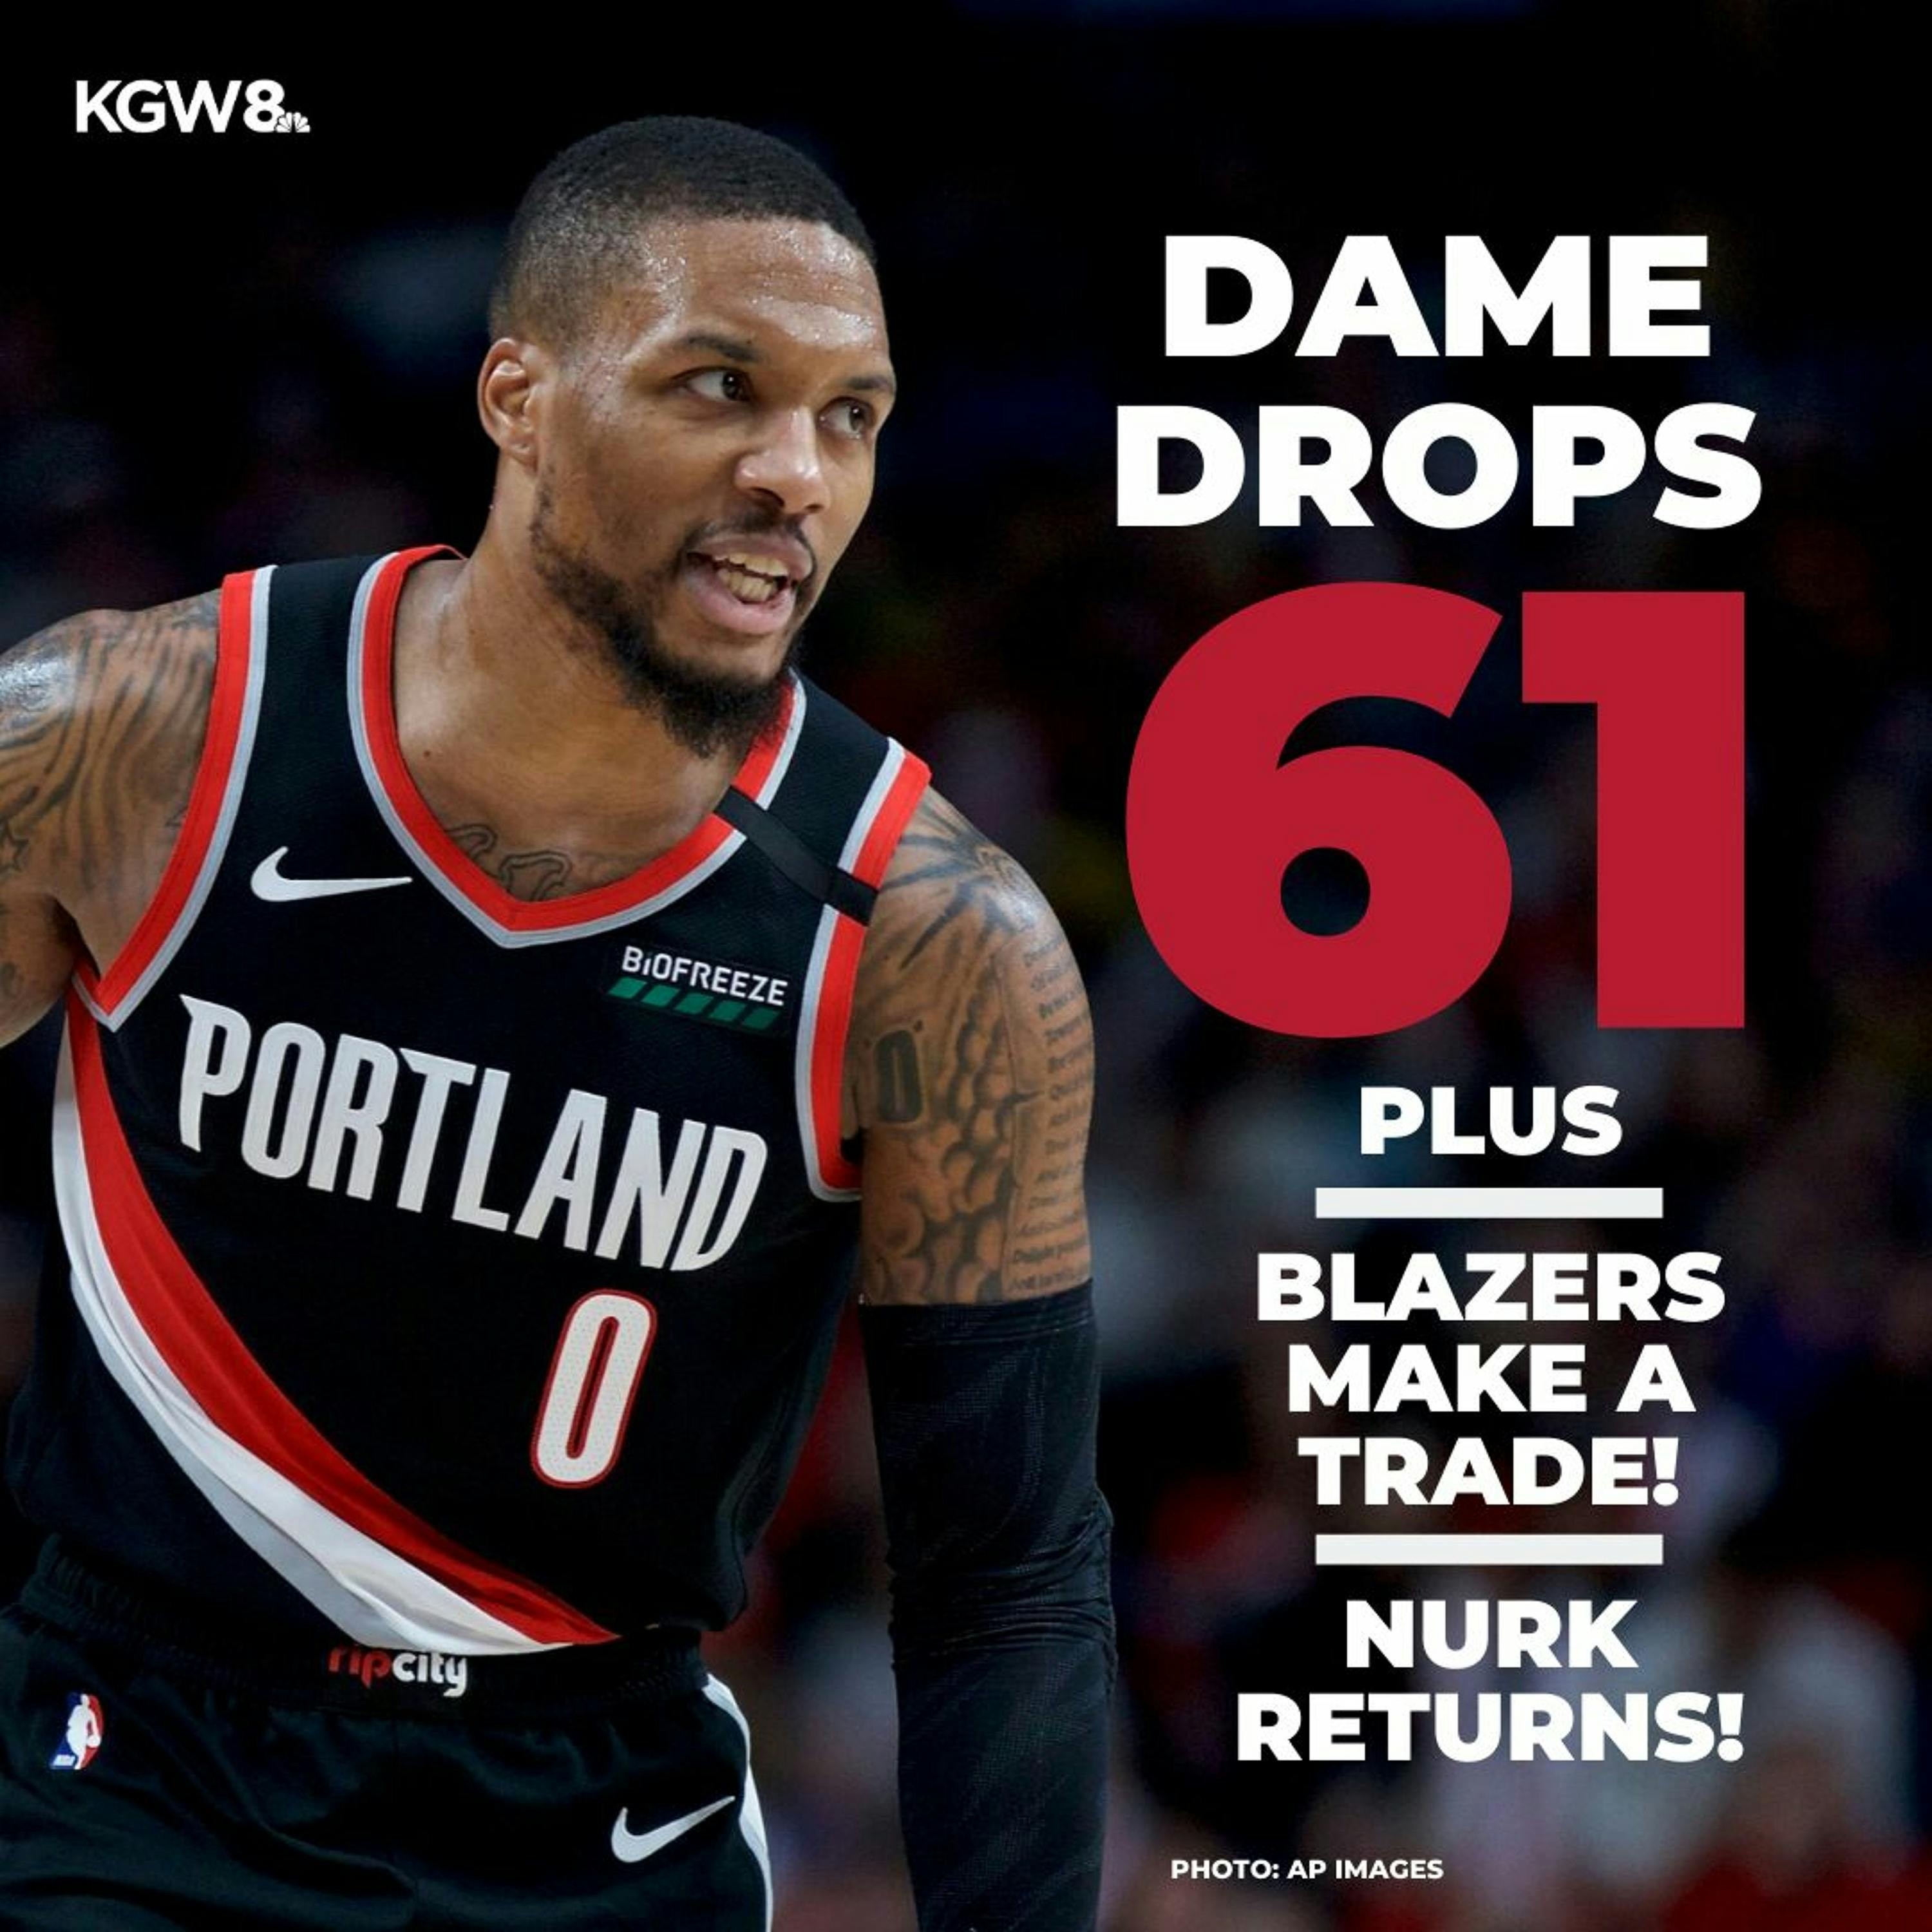 Nurk returns, Dame drops 61 and Blazers make their first trade of the season